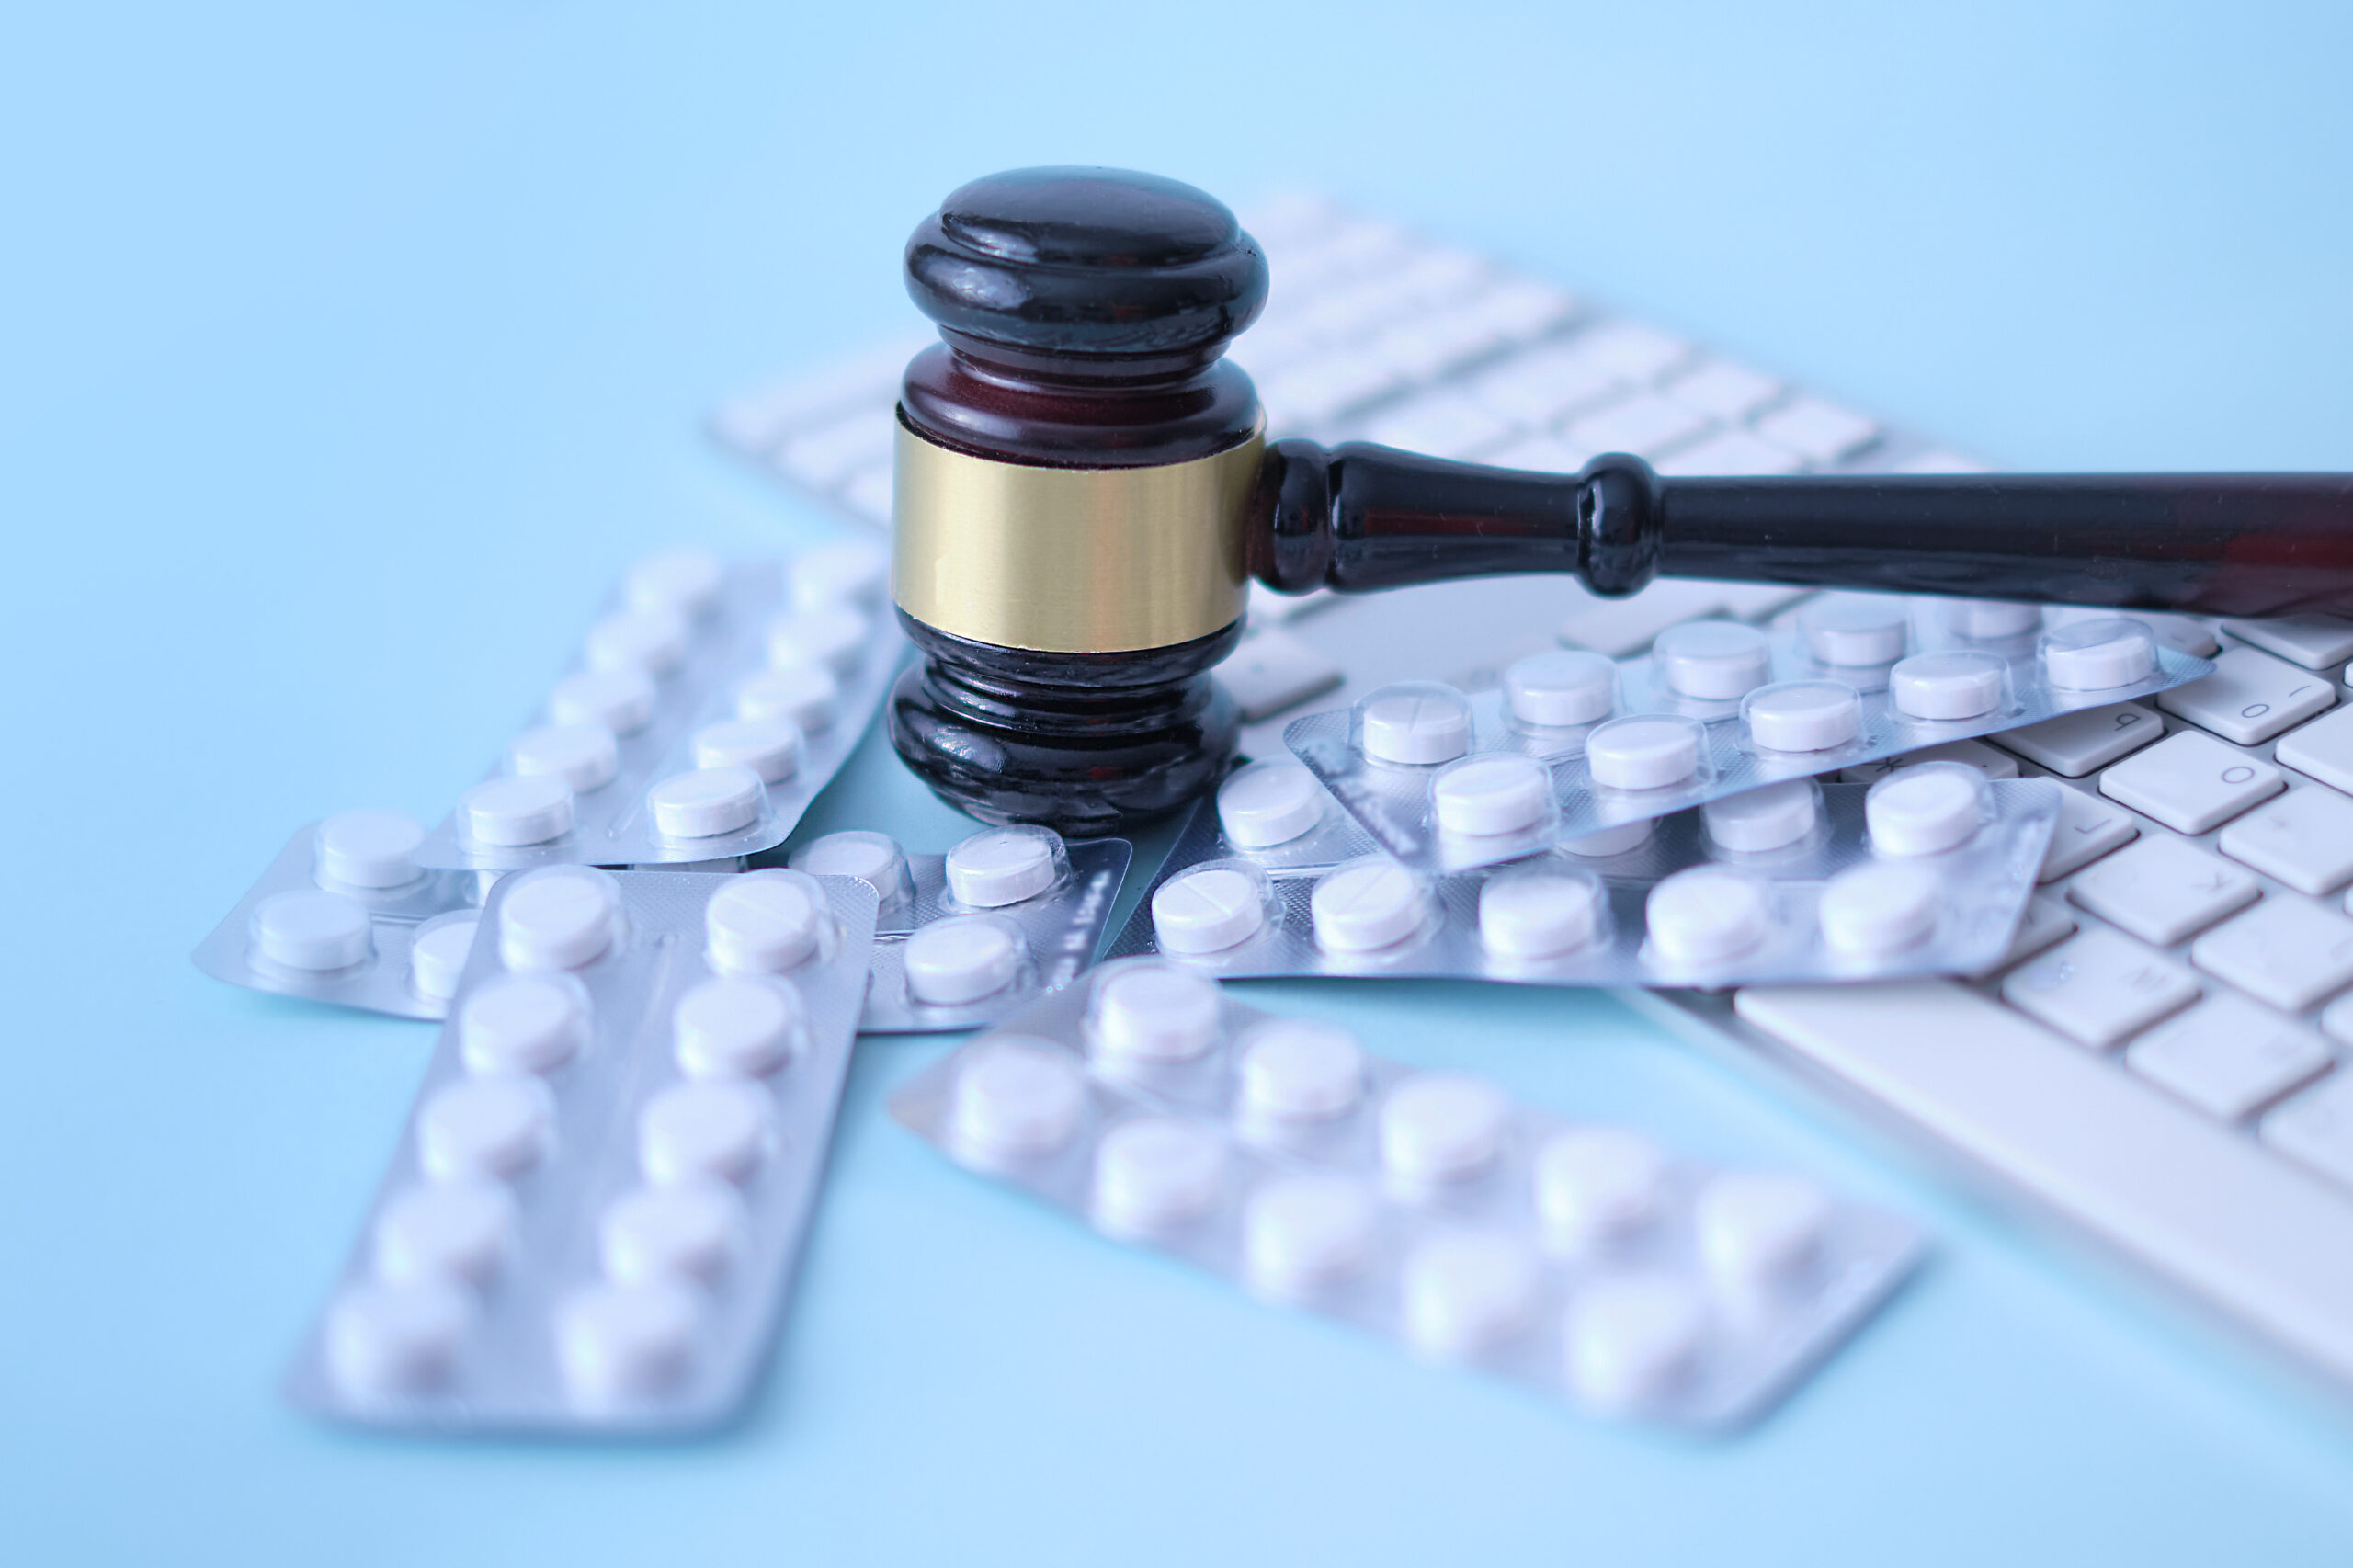 Do lawsuits affect drug prices?